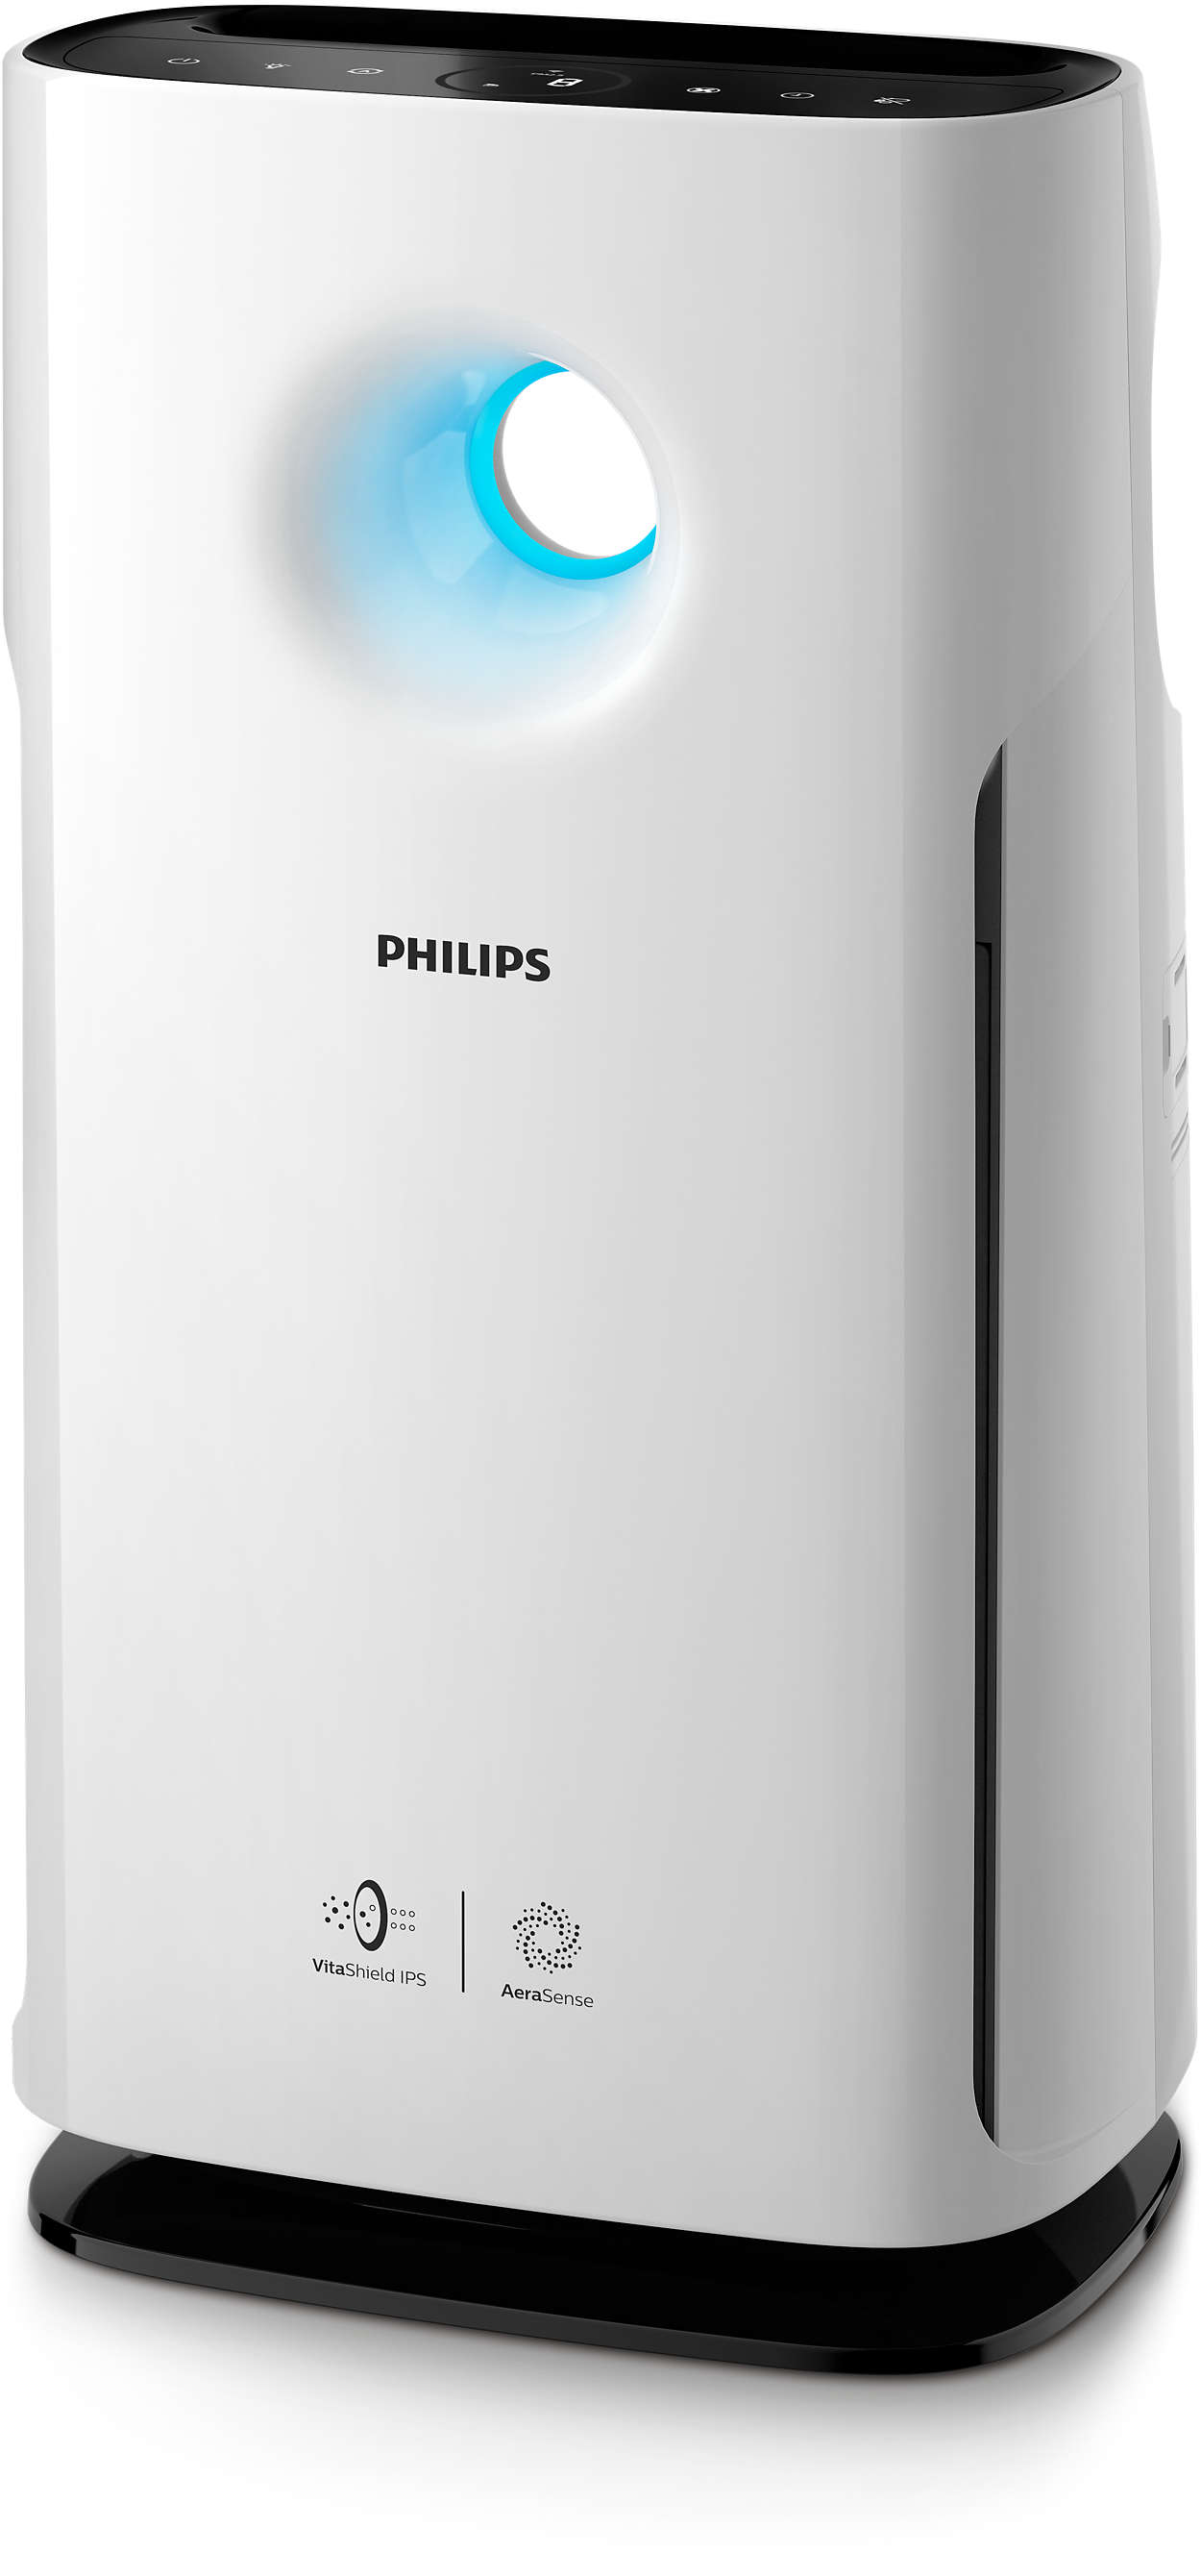 Correspondence fiction Announcement Series 3000i Air Cleaner AC3259/60 | Philips